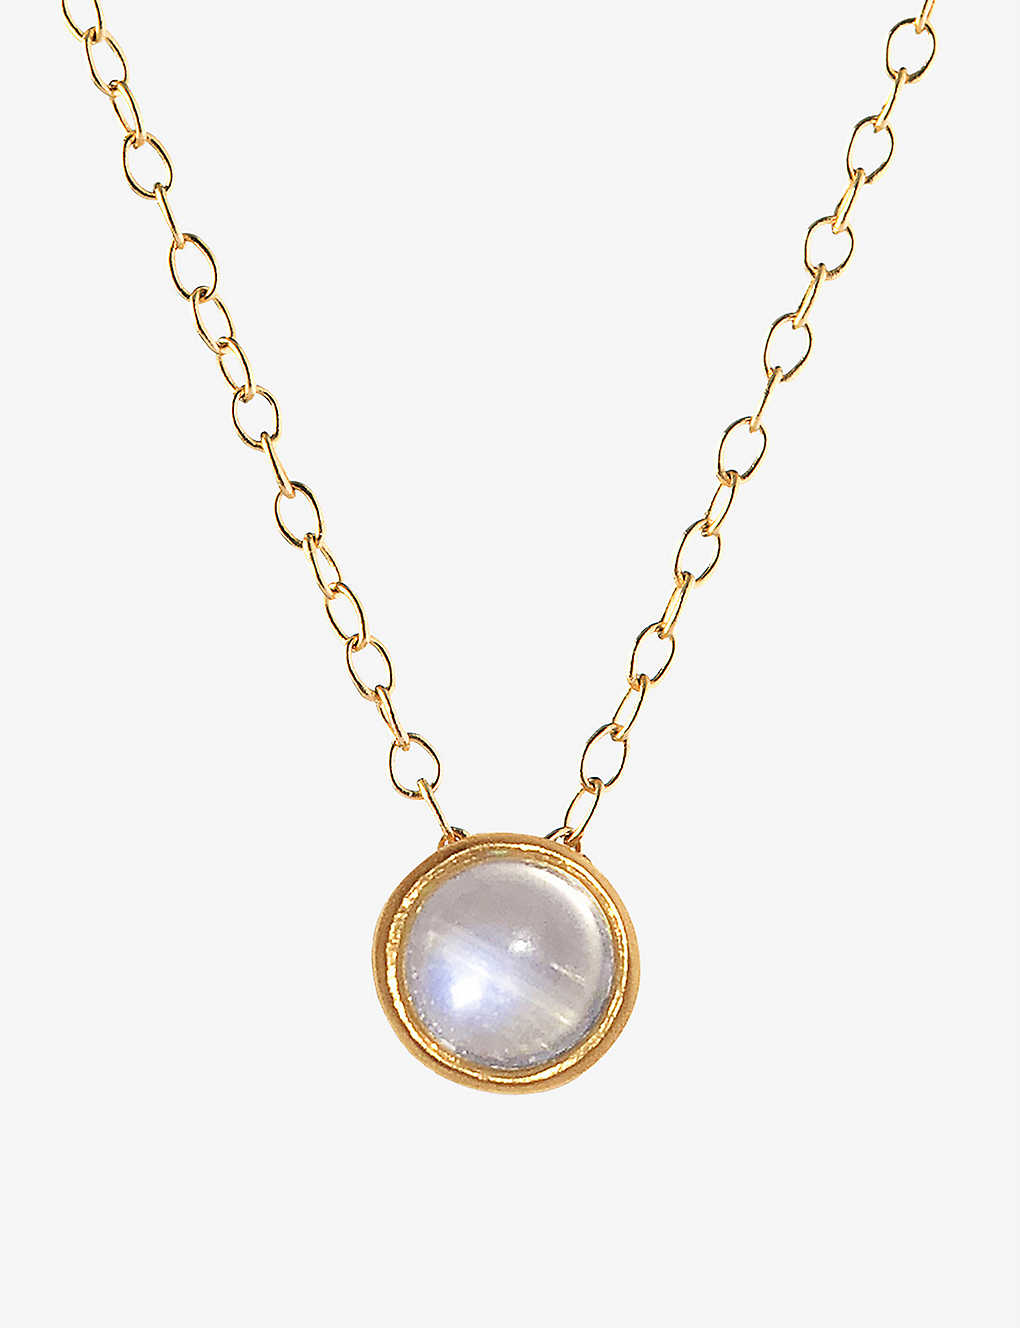 Selfridges & Co Women Accessories Jewelry Necklaces Sandy Leong Dot June birthstone recycled 18ct yellow and moonstone necklace 